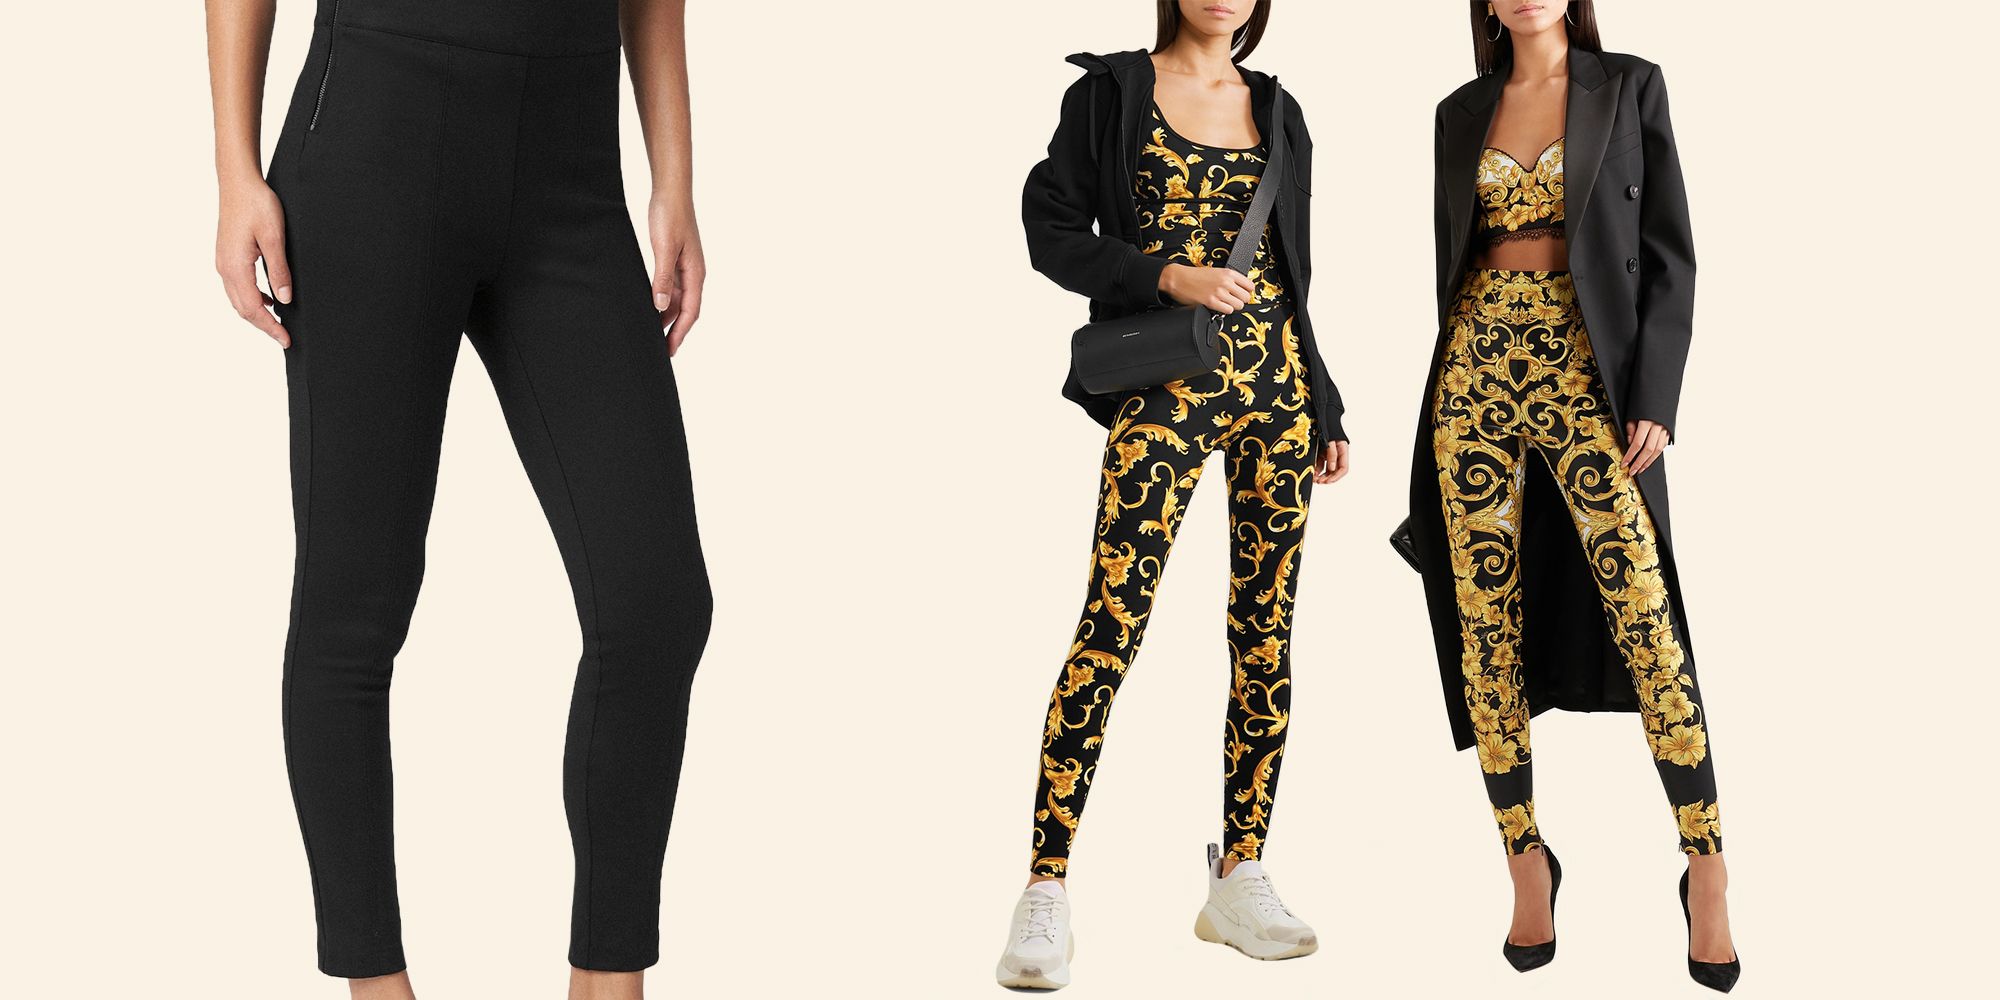  Women's Leggings - SATINA / Women's Leggings / Women's Clothing:  Clothing, Shoes & Jewelry